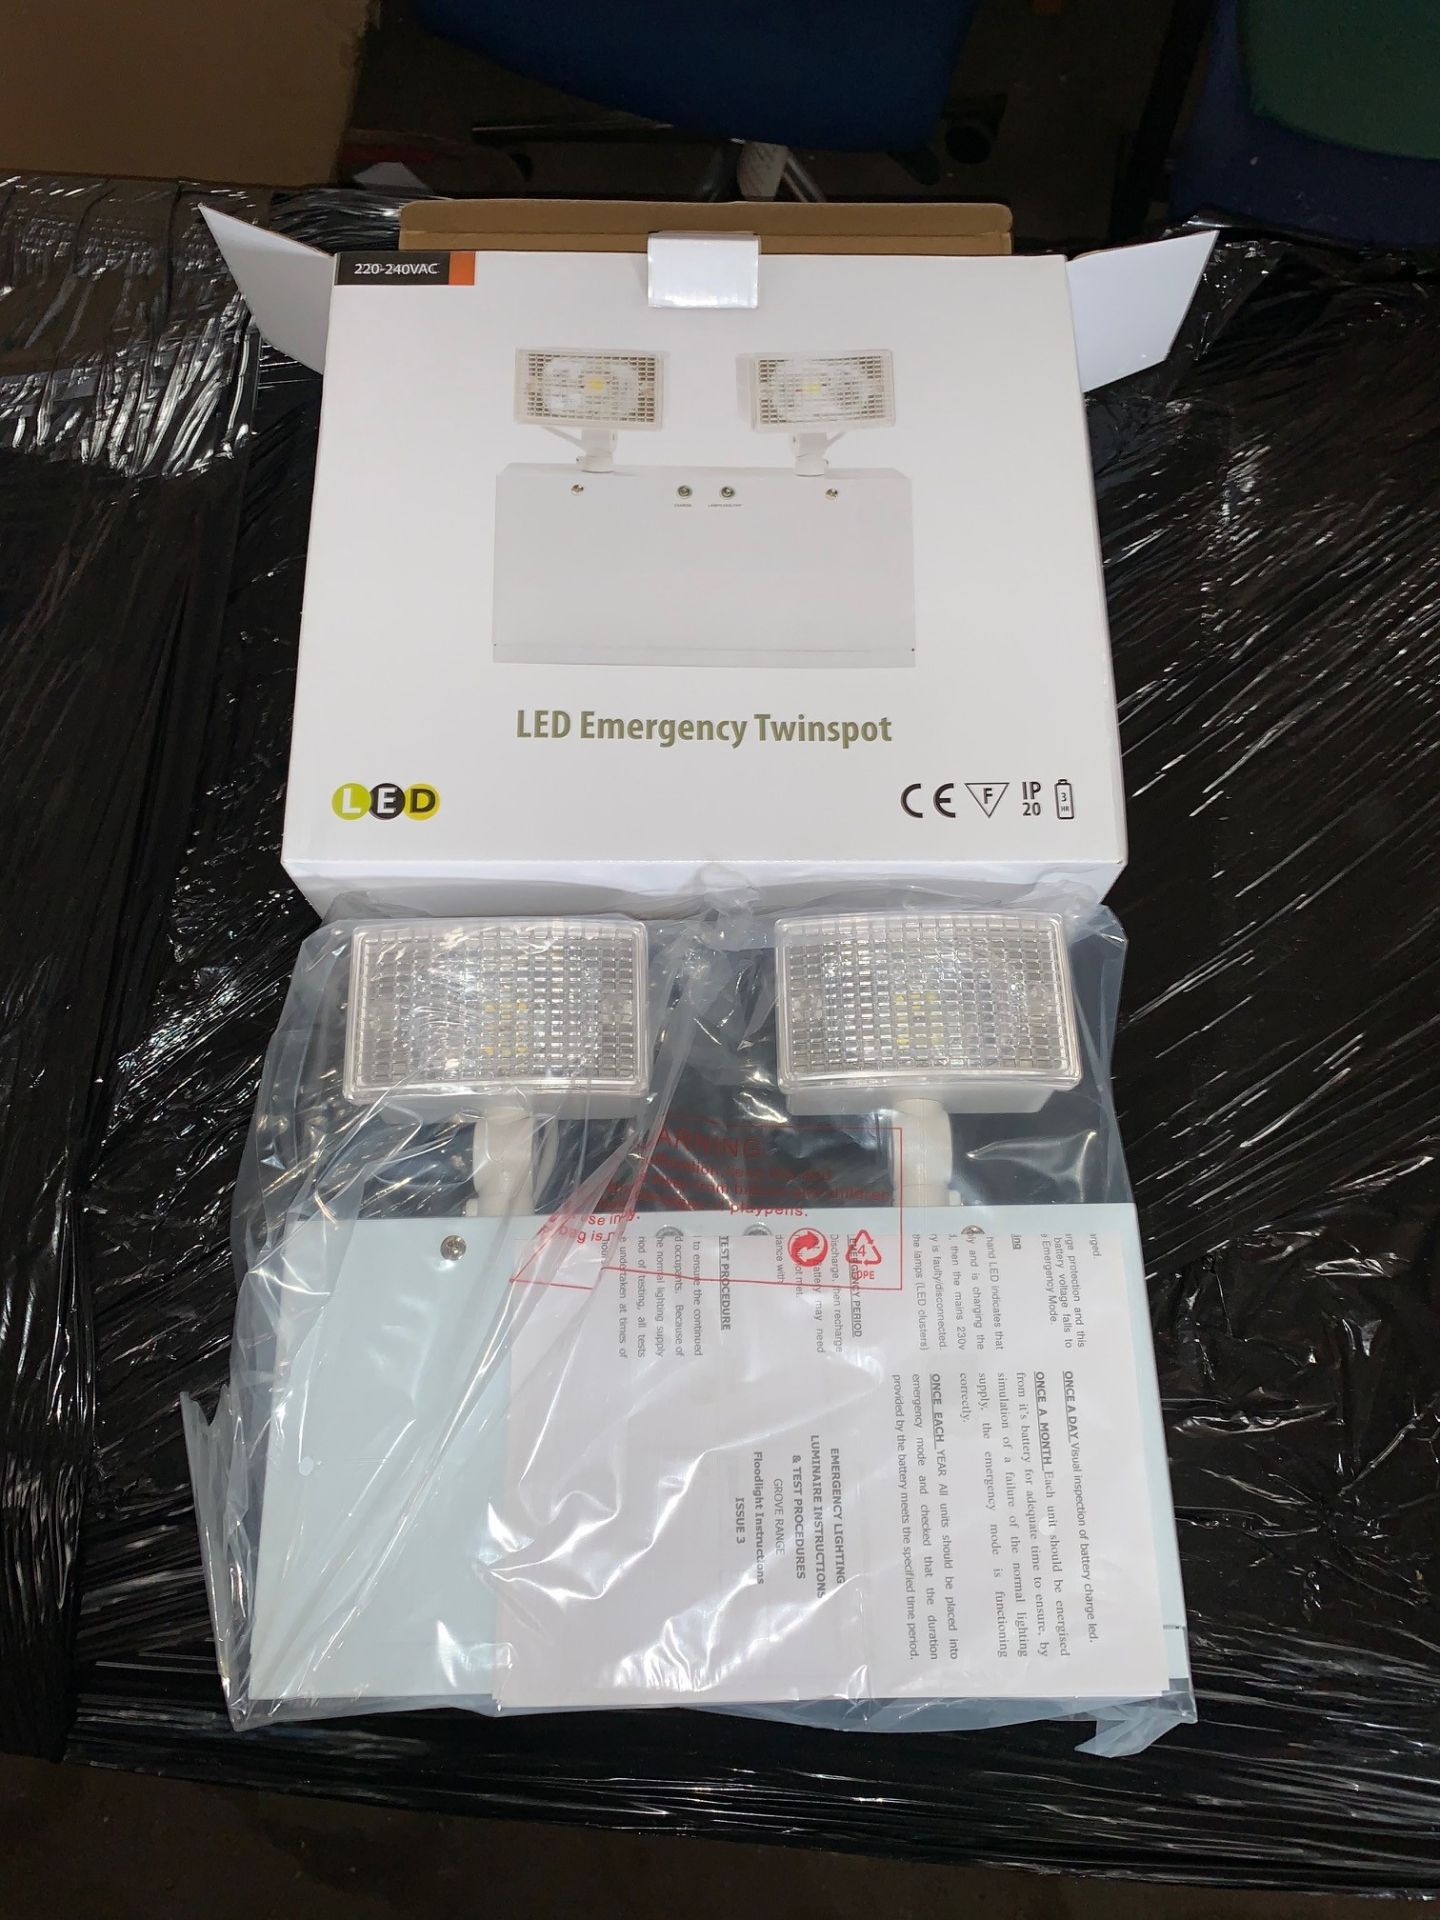 Channel LED Emergency Twinspot 220-240VAC - Product Code GR/NM3/LED/2